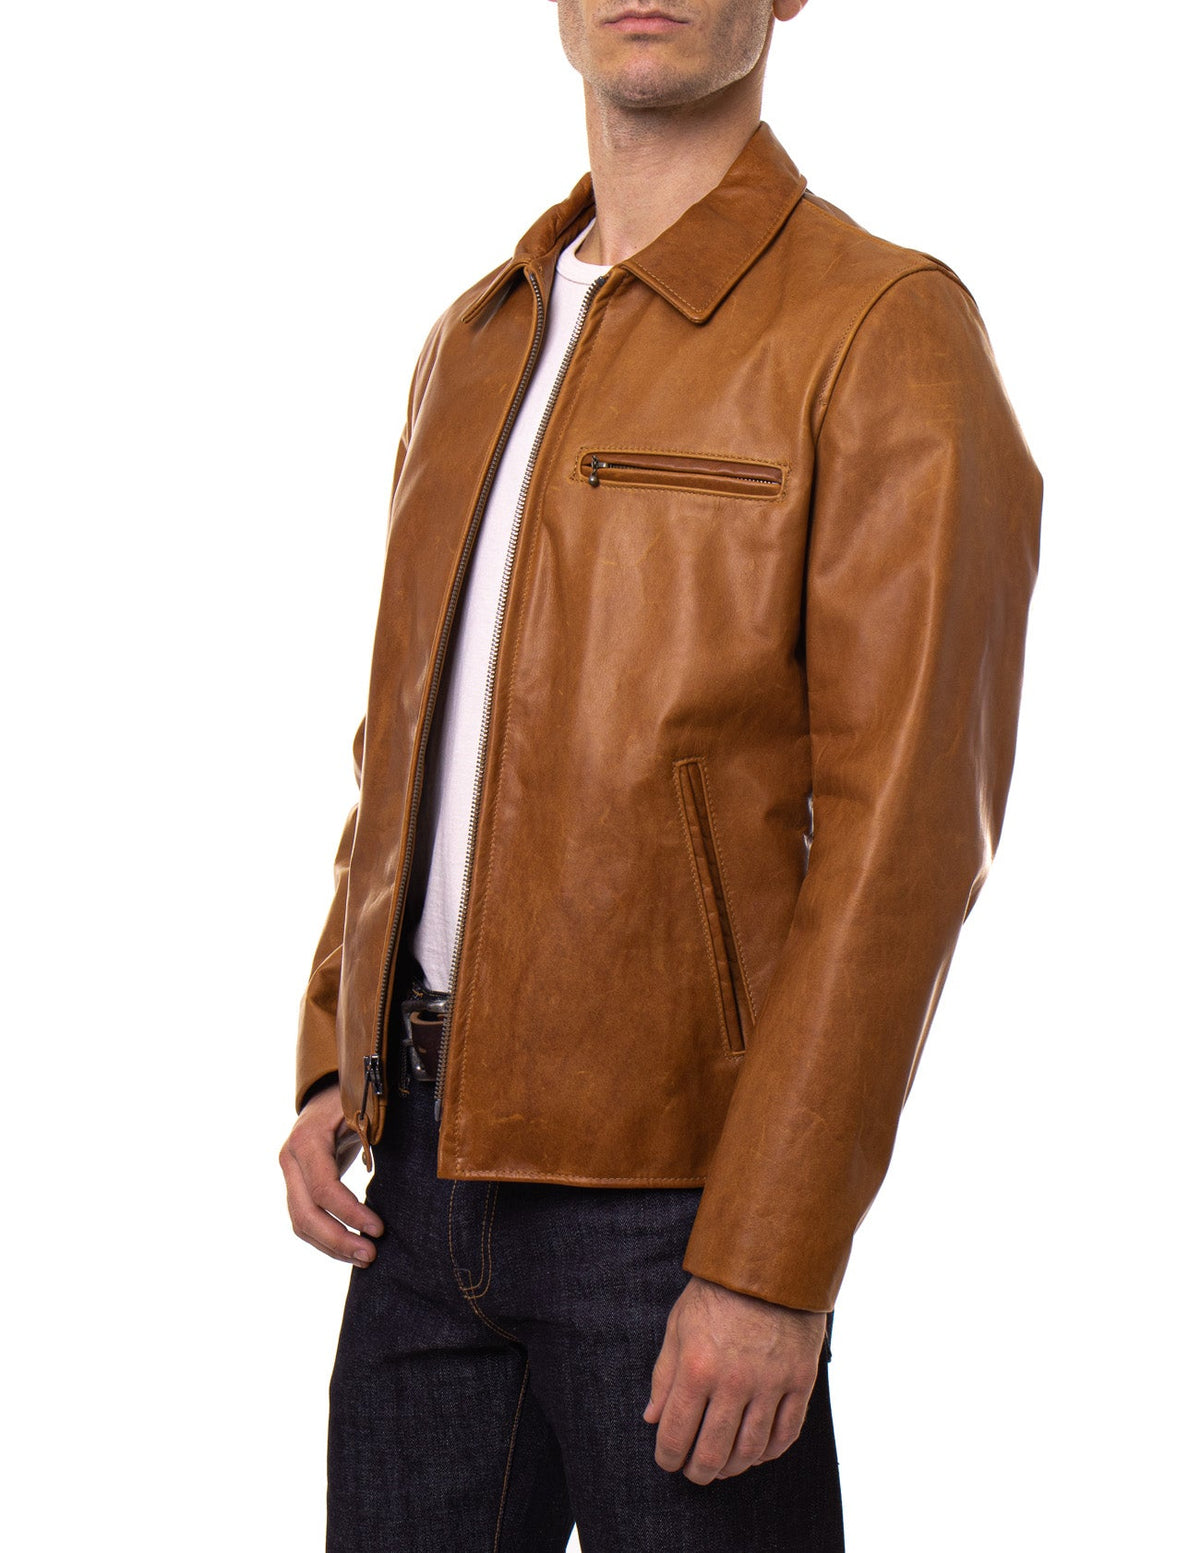 Mahogany Brown Men’s Real Leather Jacket